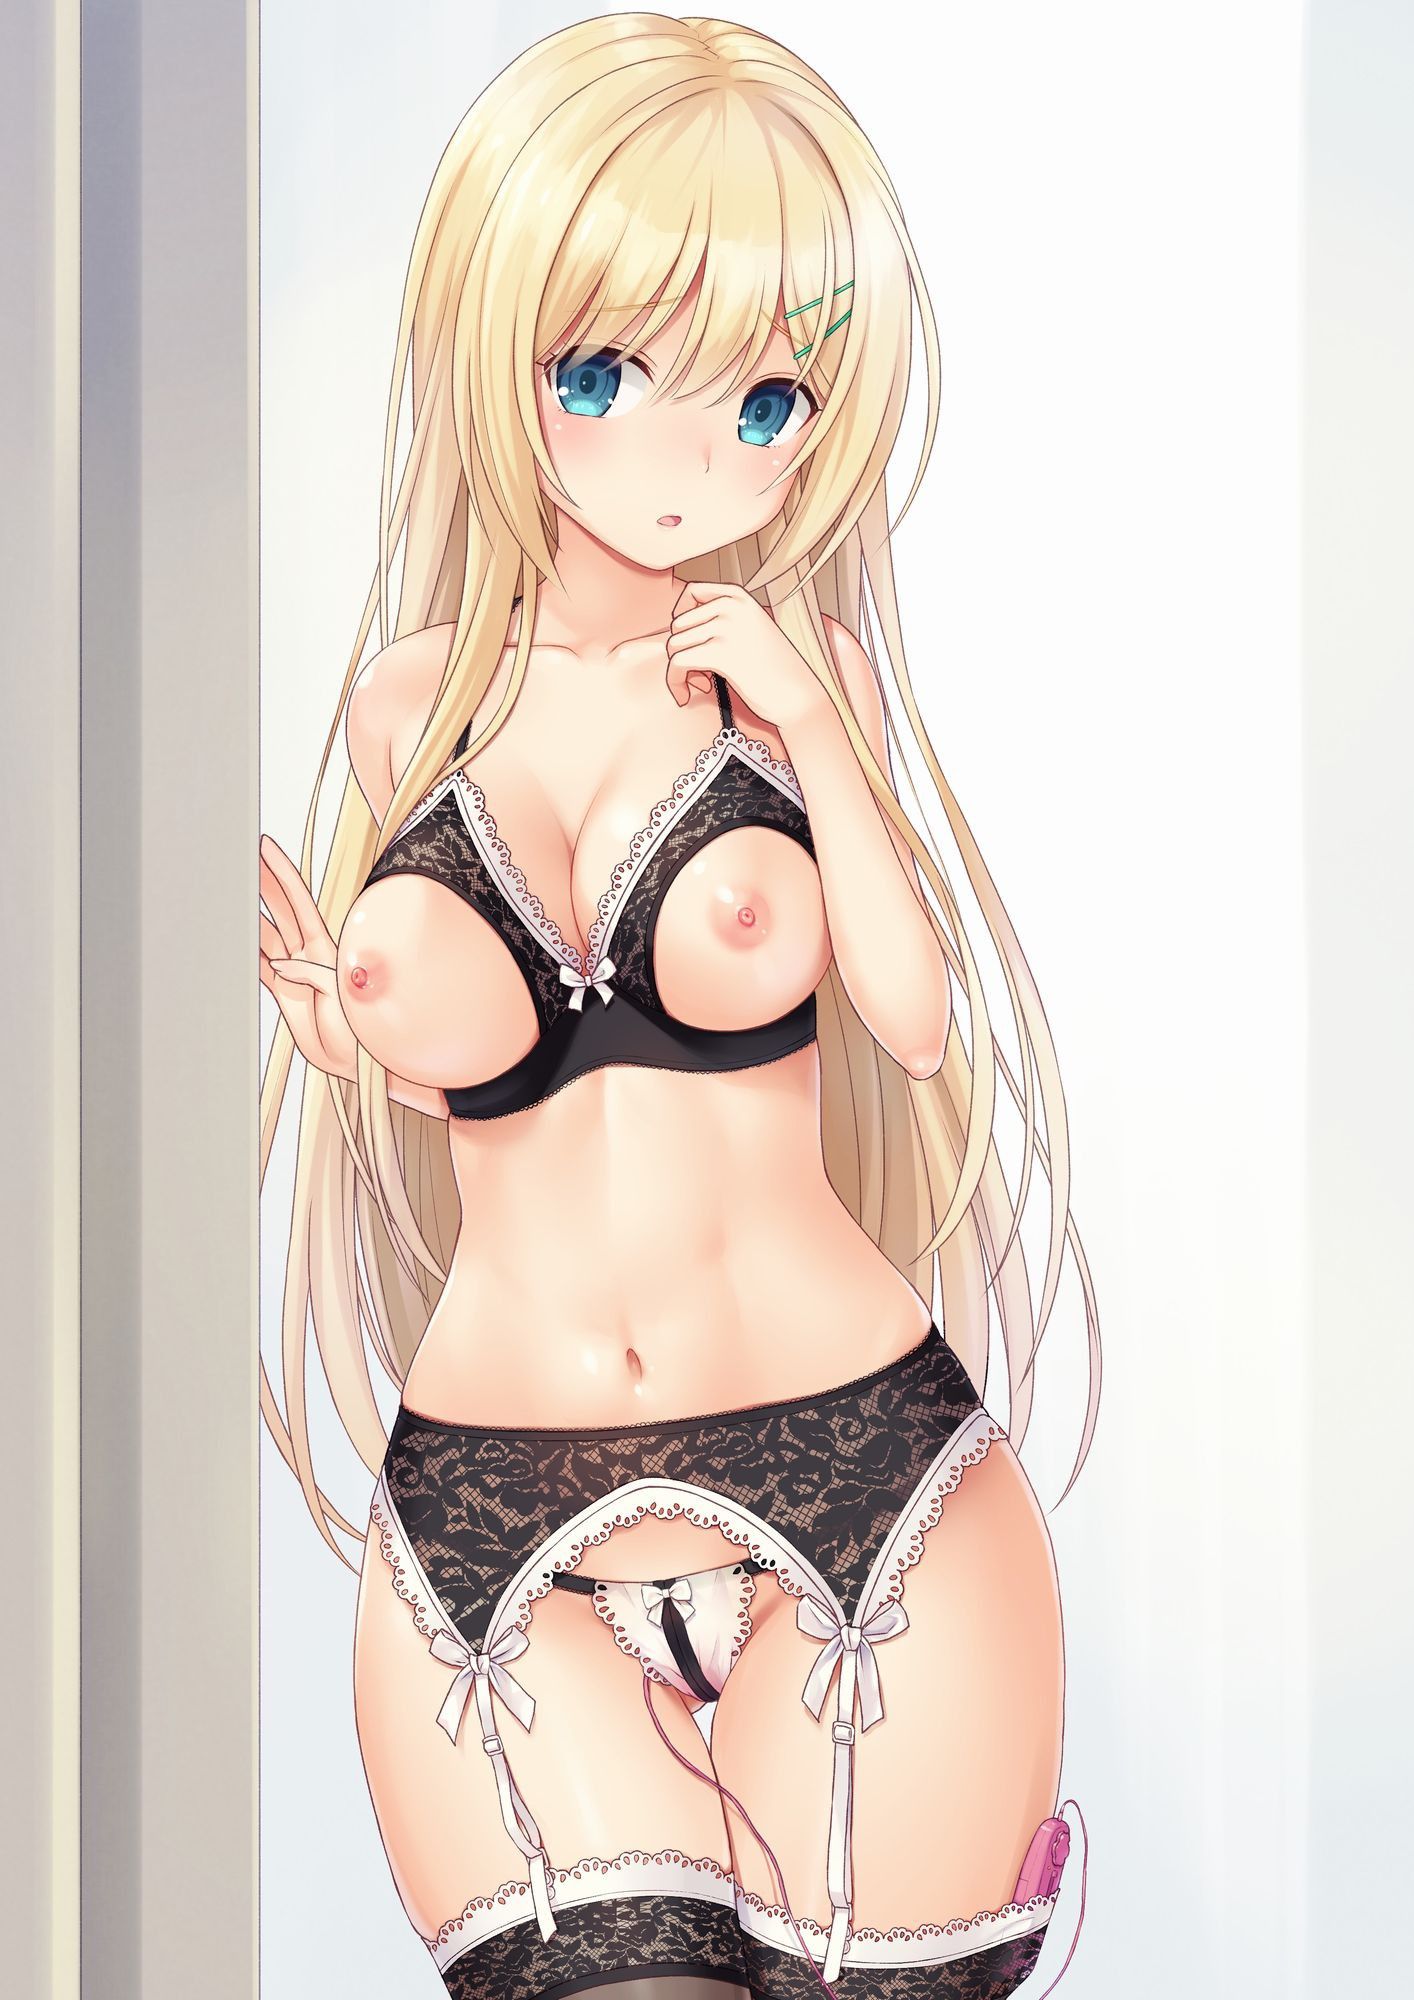 【Secondary erotic】 There is no point in wearing, but here is an erotic image of a girl wearing insanely erotic underwear and swimsuit 11